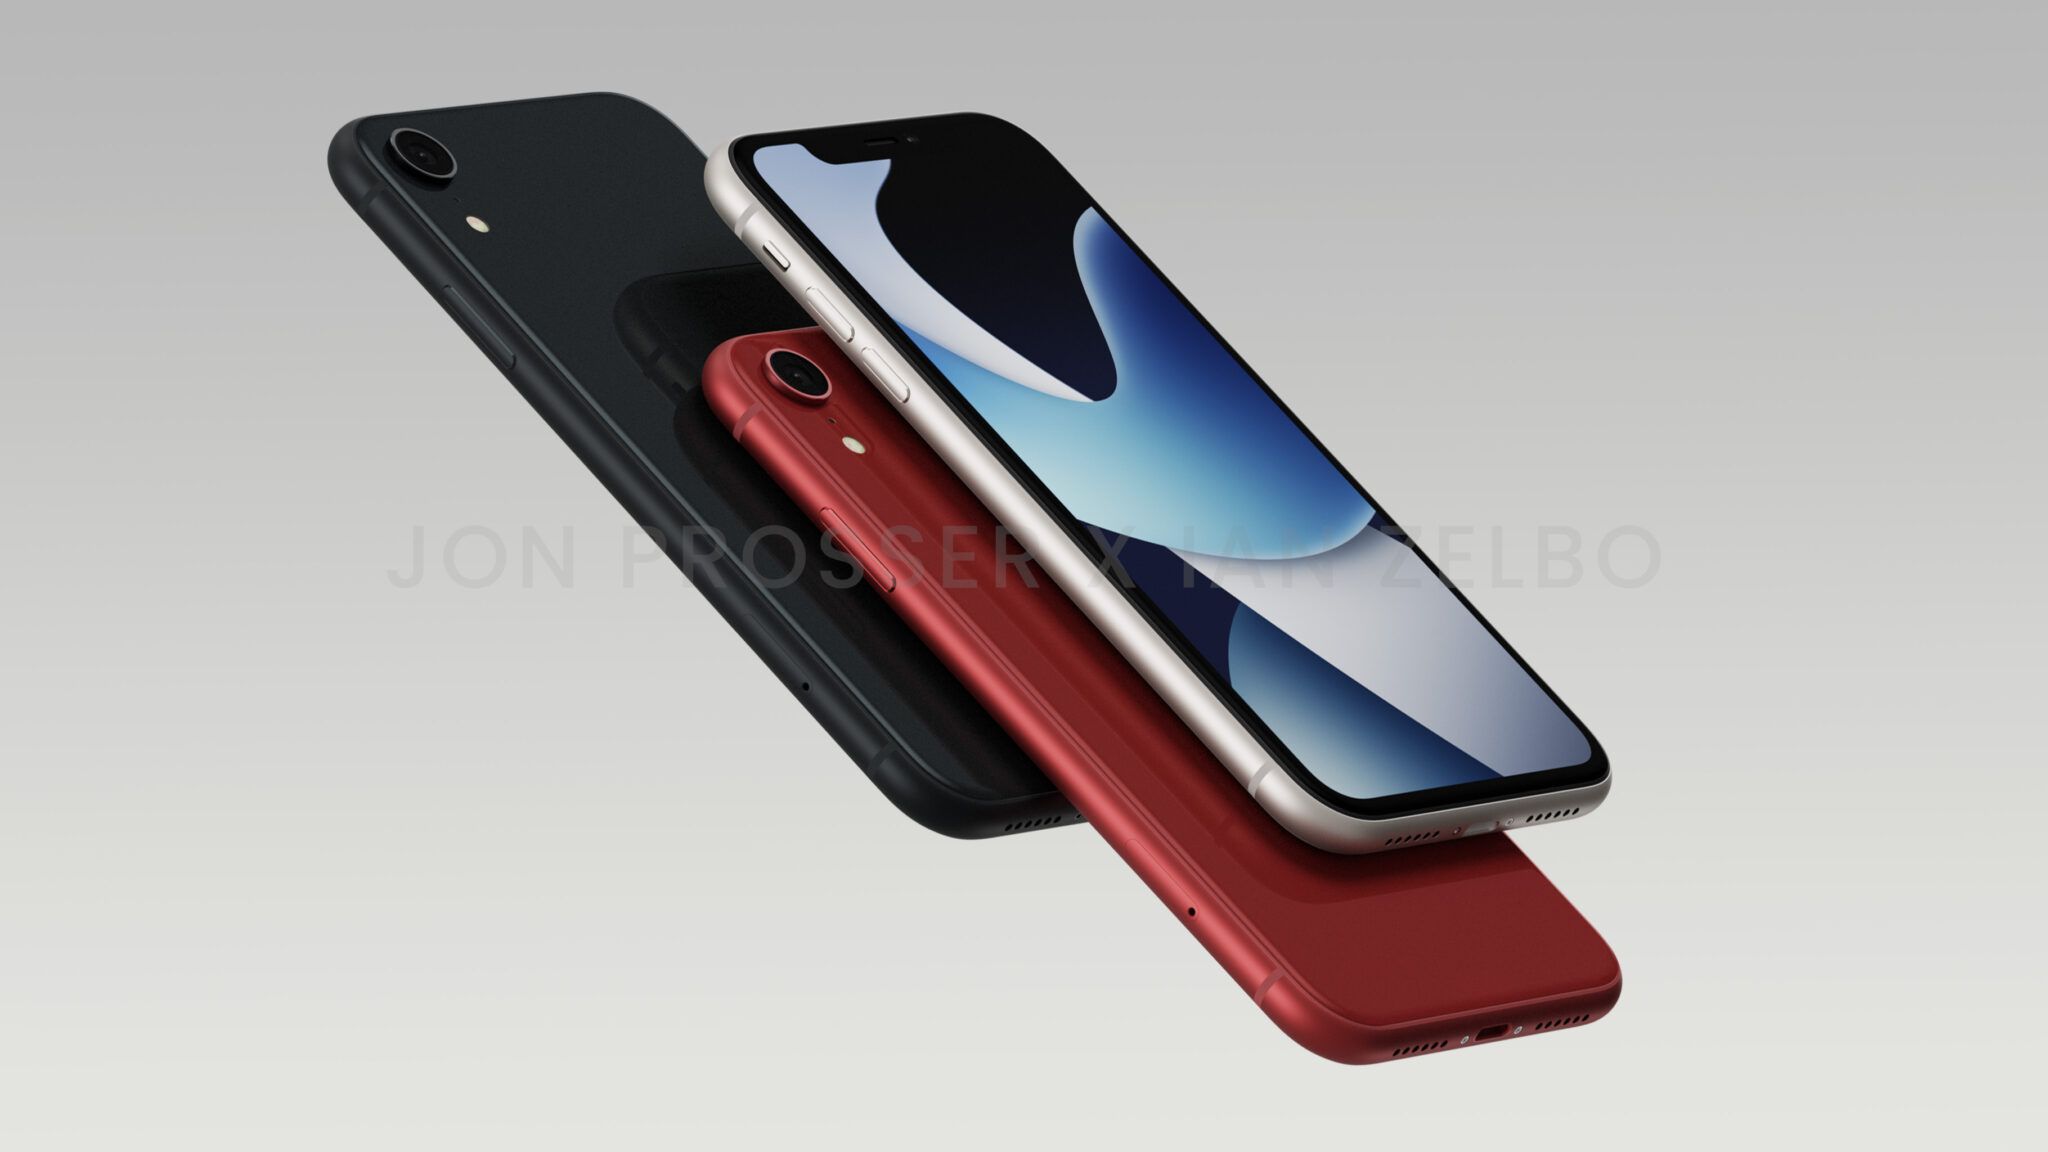 Prosser: iPhone SE 4 will use iPhone XR design